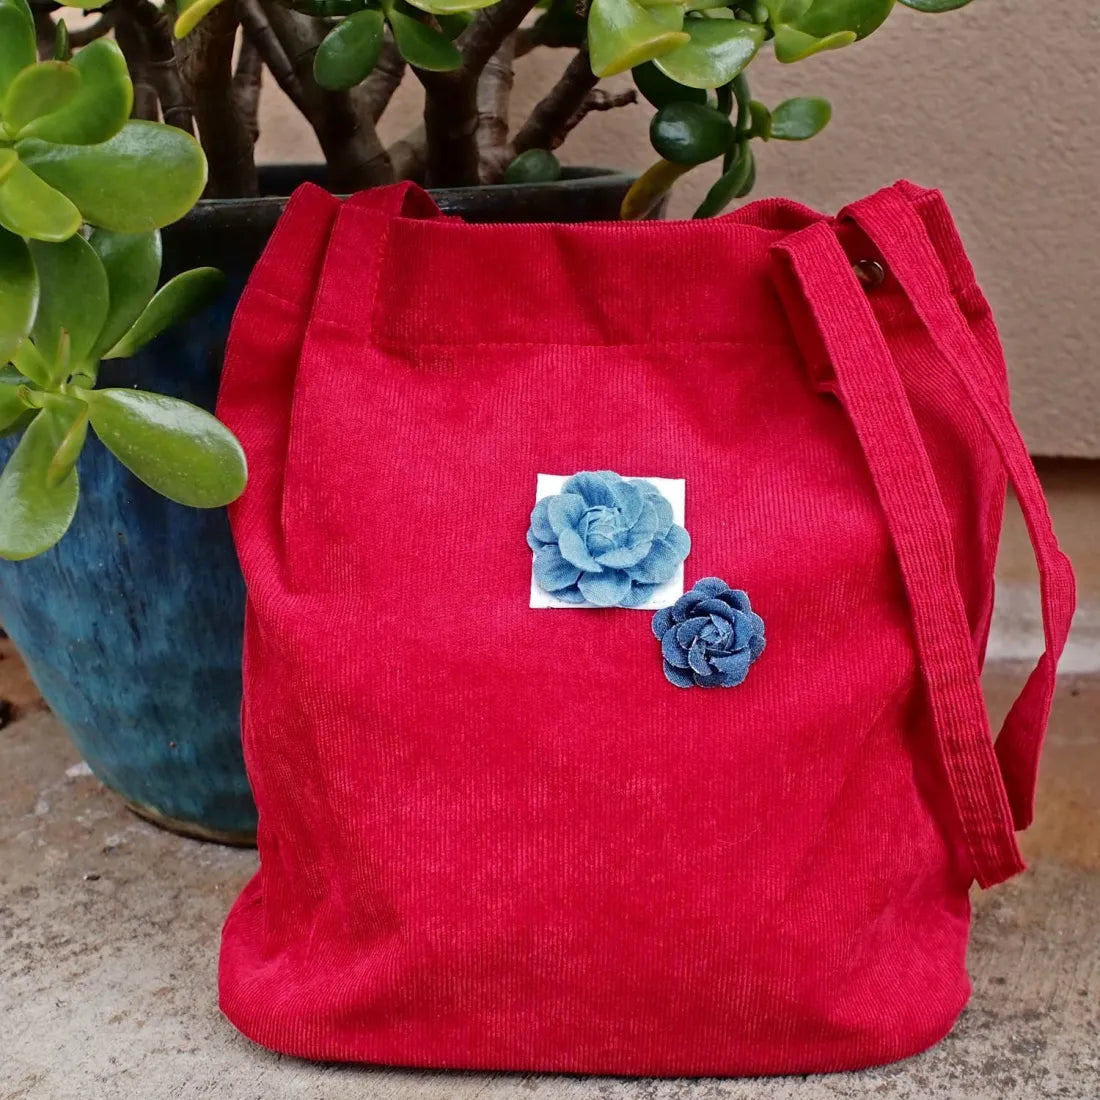 Red Maile Denim Floral Corduroy Tote Bag - Made In Hawaii